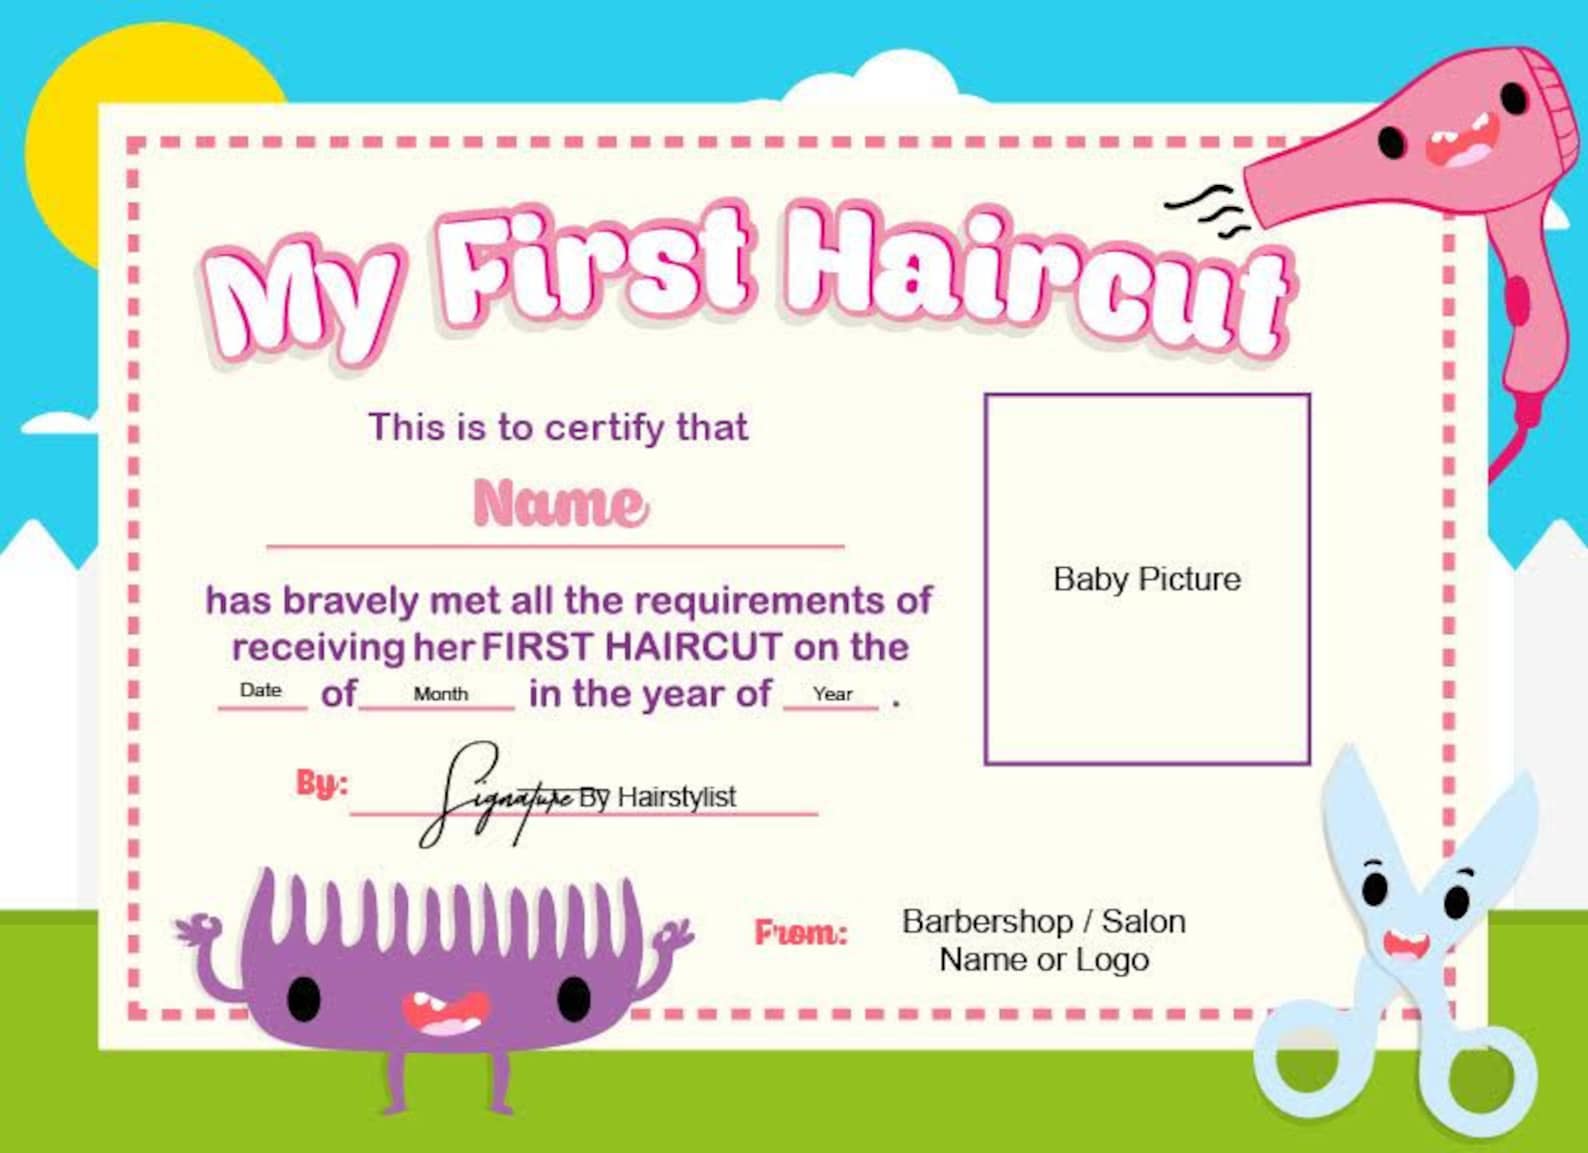 printable-first-haircut-certificate